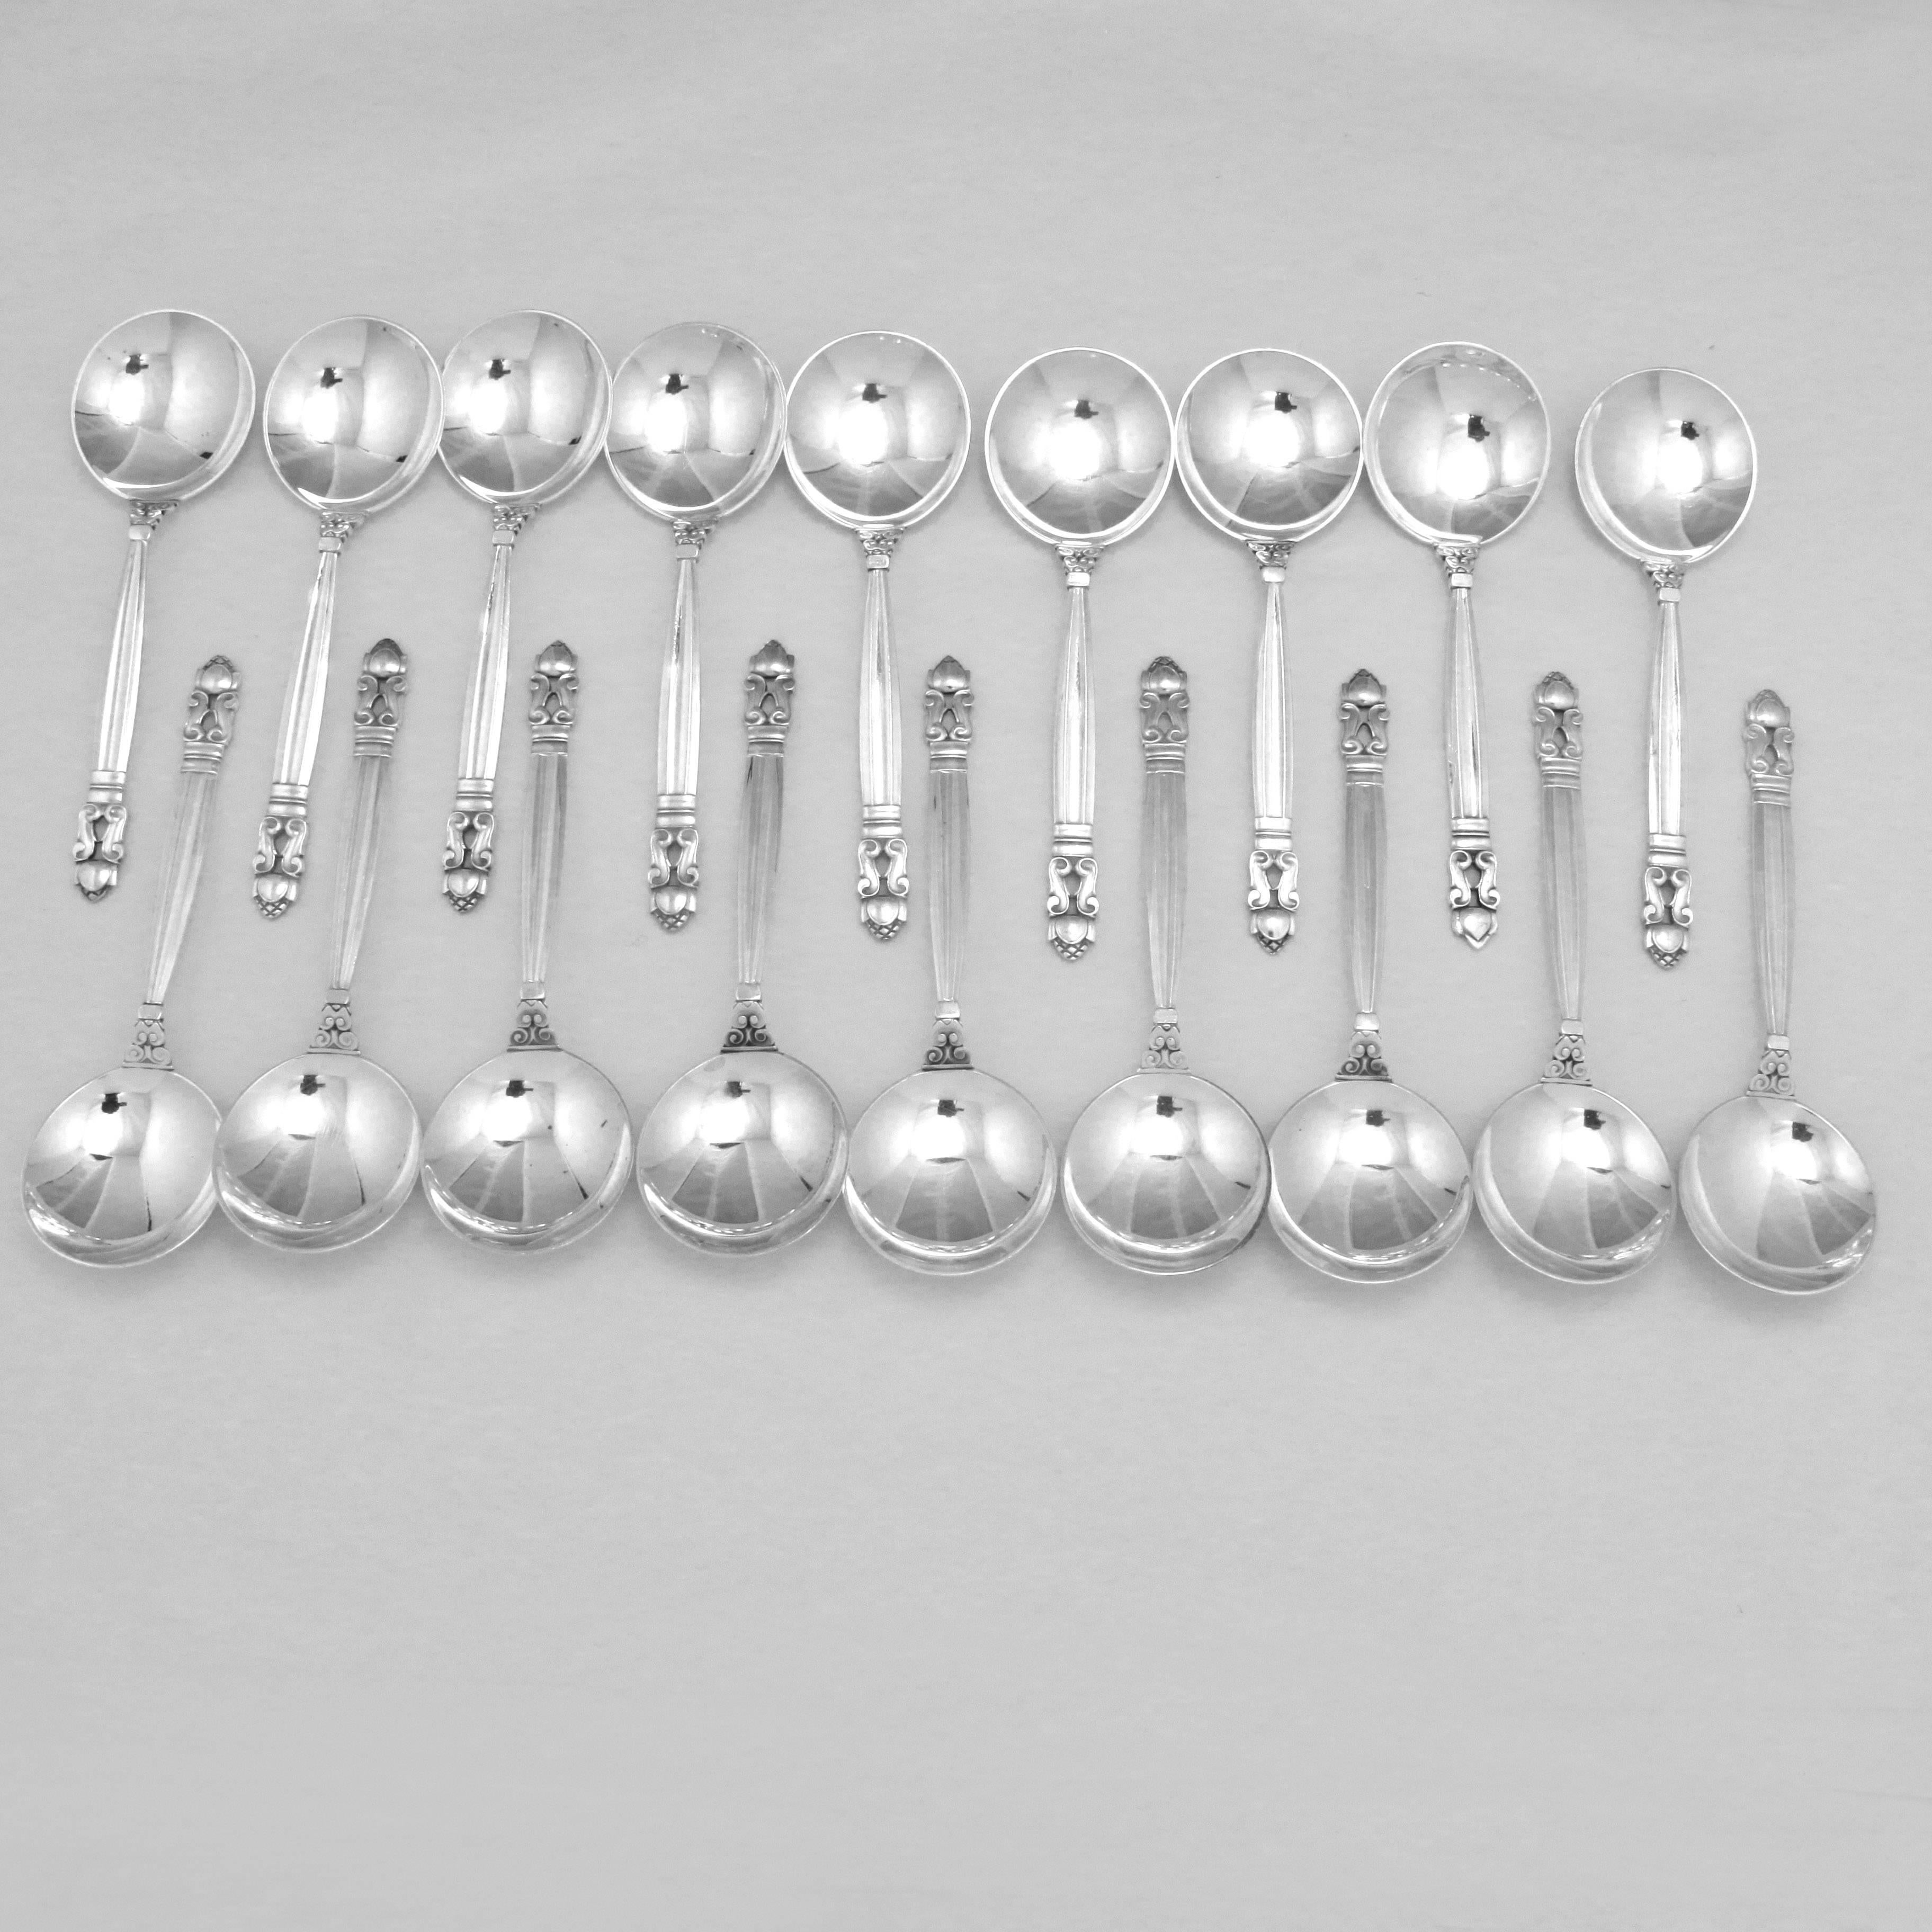 Georg Jensen Acorn Sterling Silver Flatware Set for 12, in all 126 Pieces In Good Condition For Sale In Montreal, QC